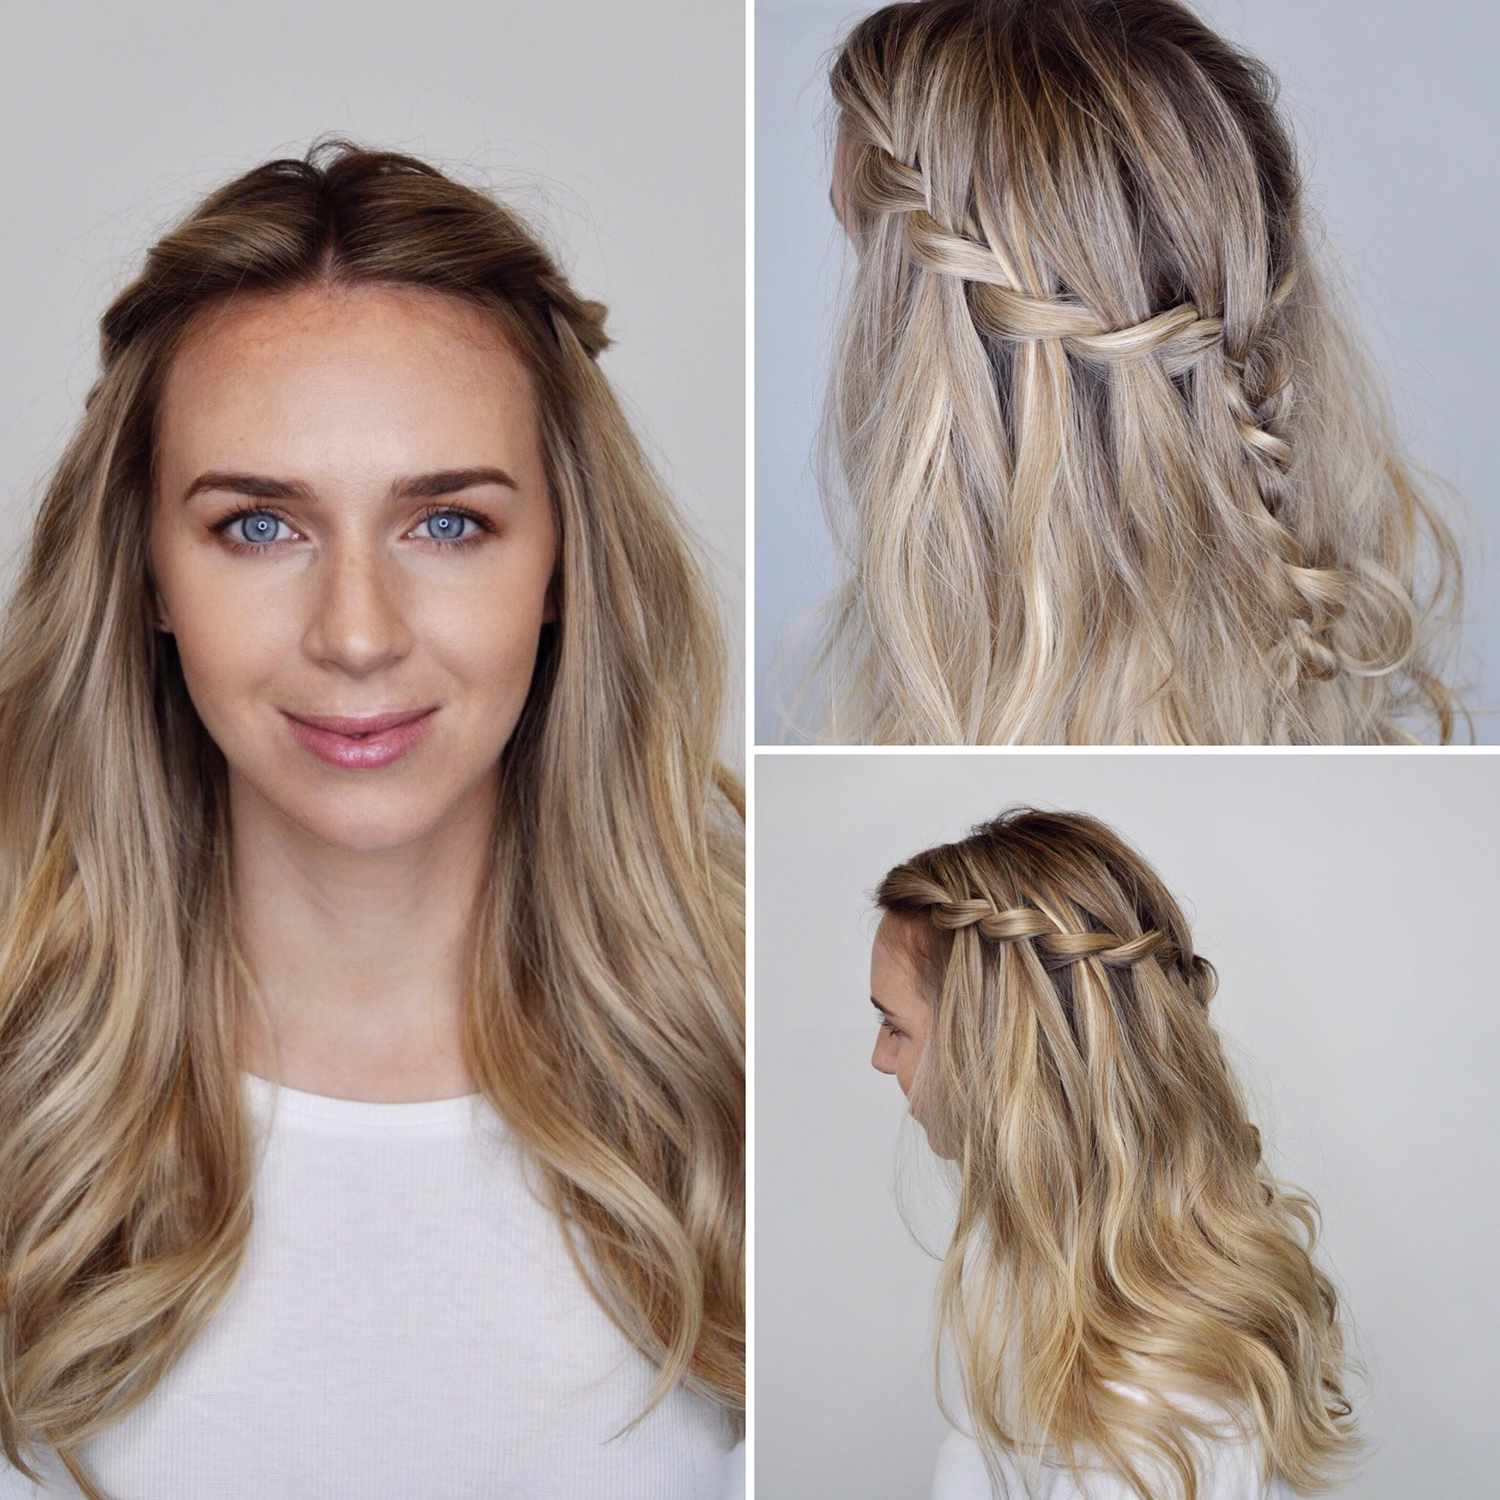 Do hair pretty with things to long 15 Easy